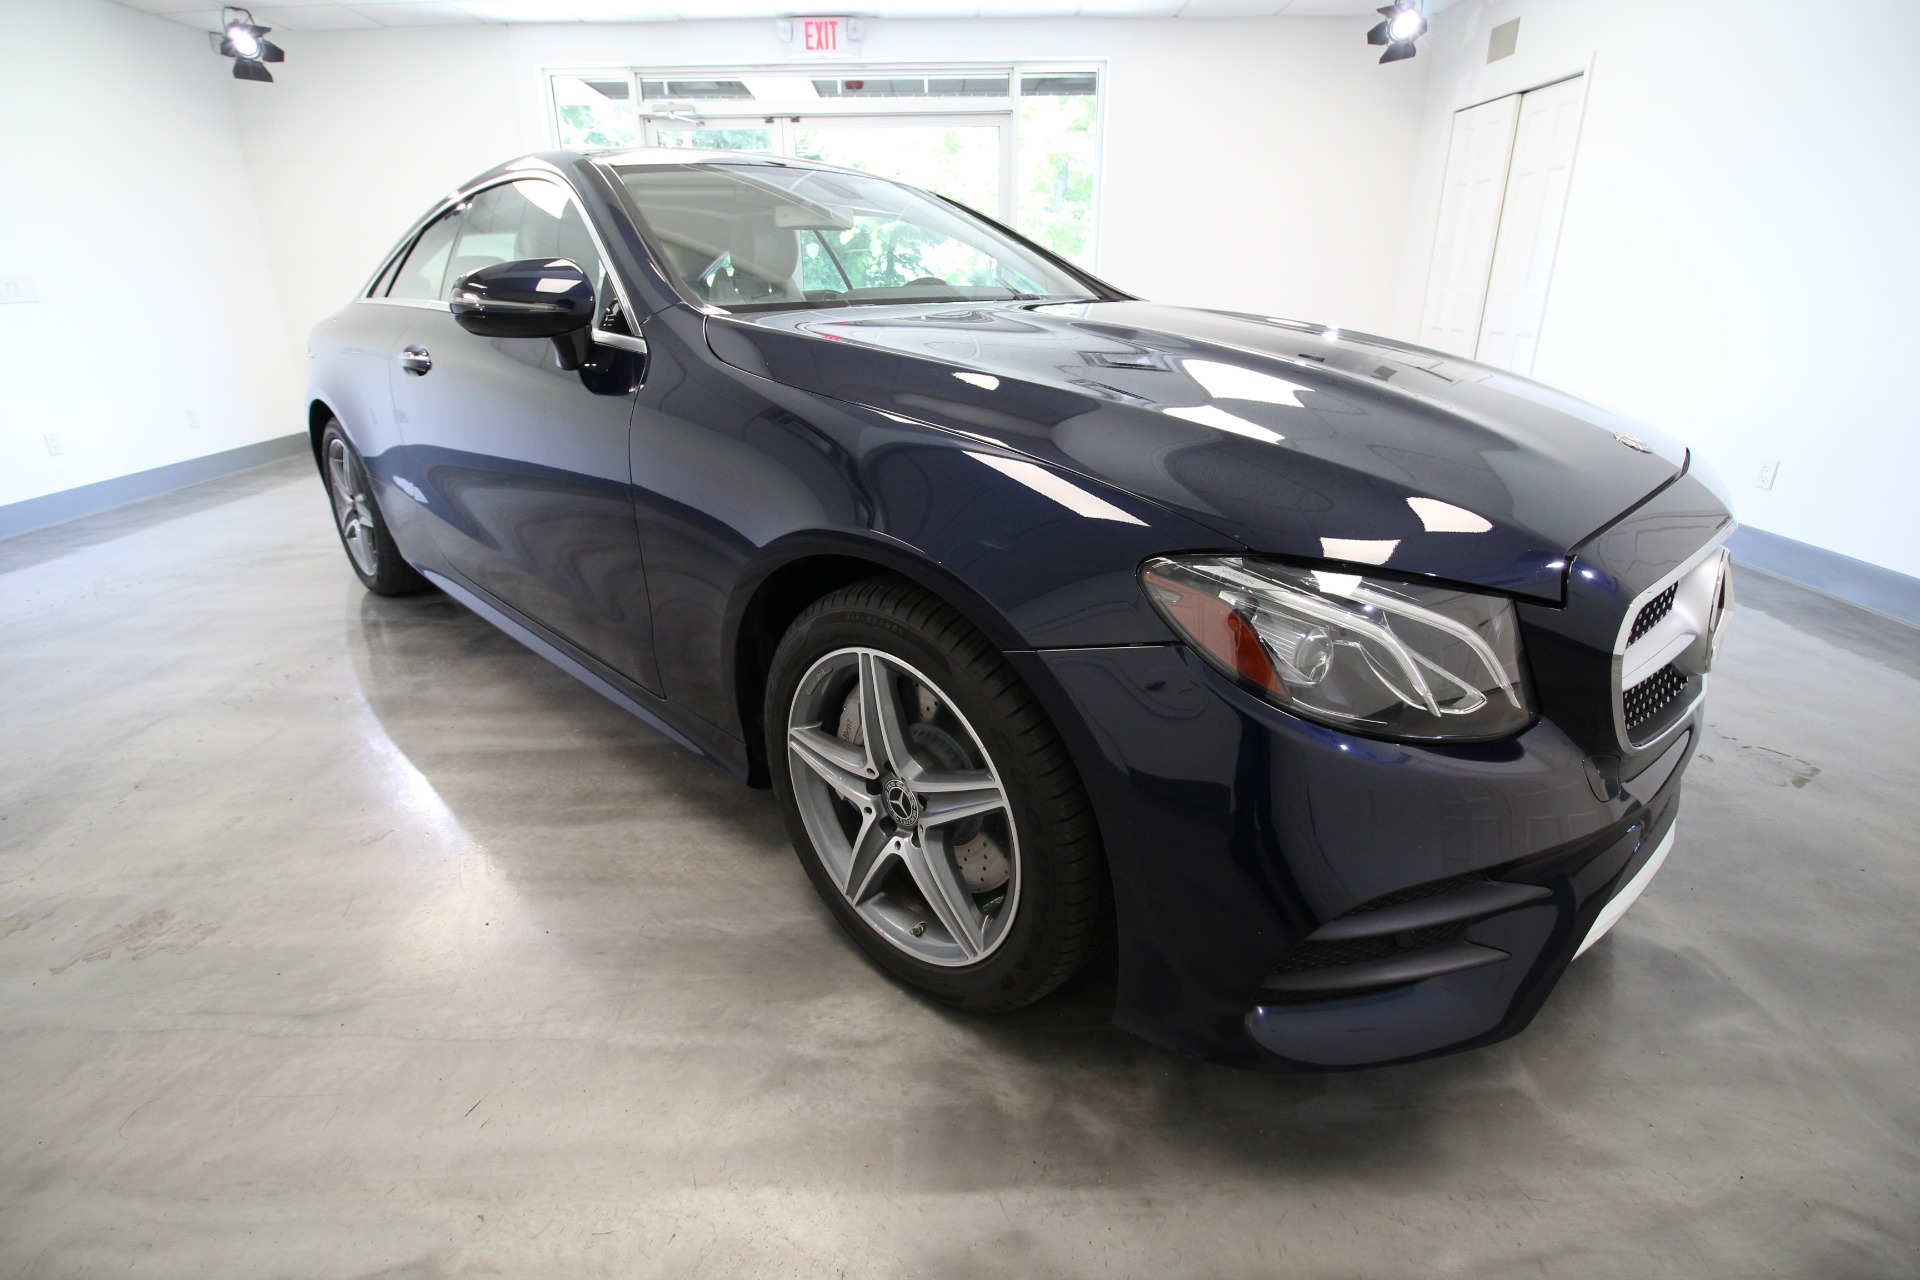 Used 2019 Lunar Blue Metallic Mercedes-Benz E-Class E450 Coupe 4MATIC AWD RARE COLORS HARD TO FIND | Albany, NY